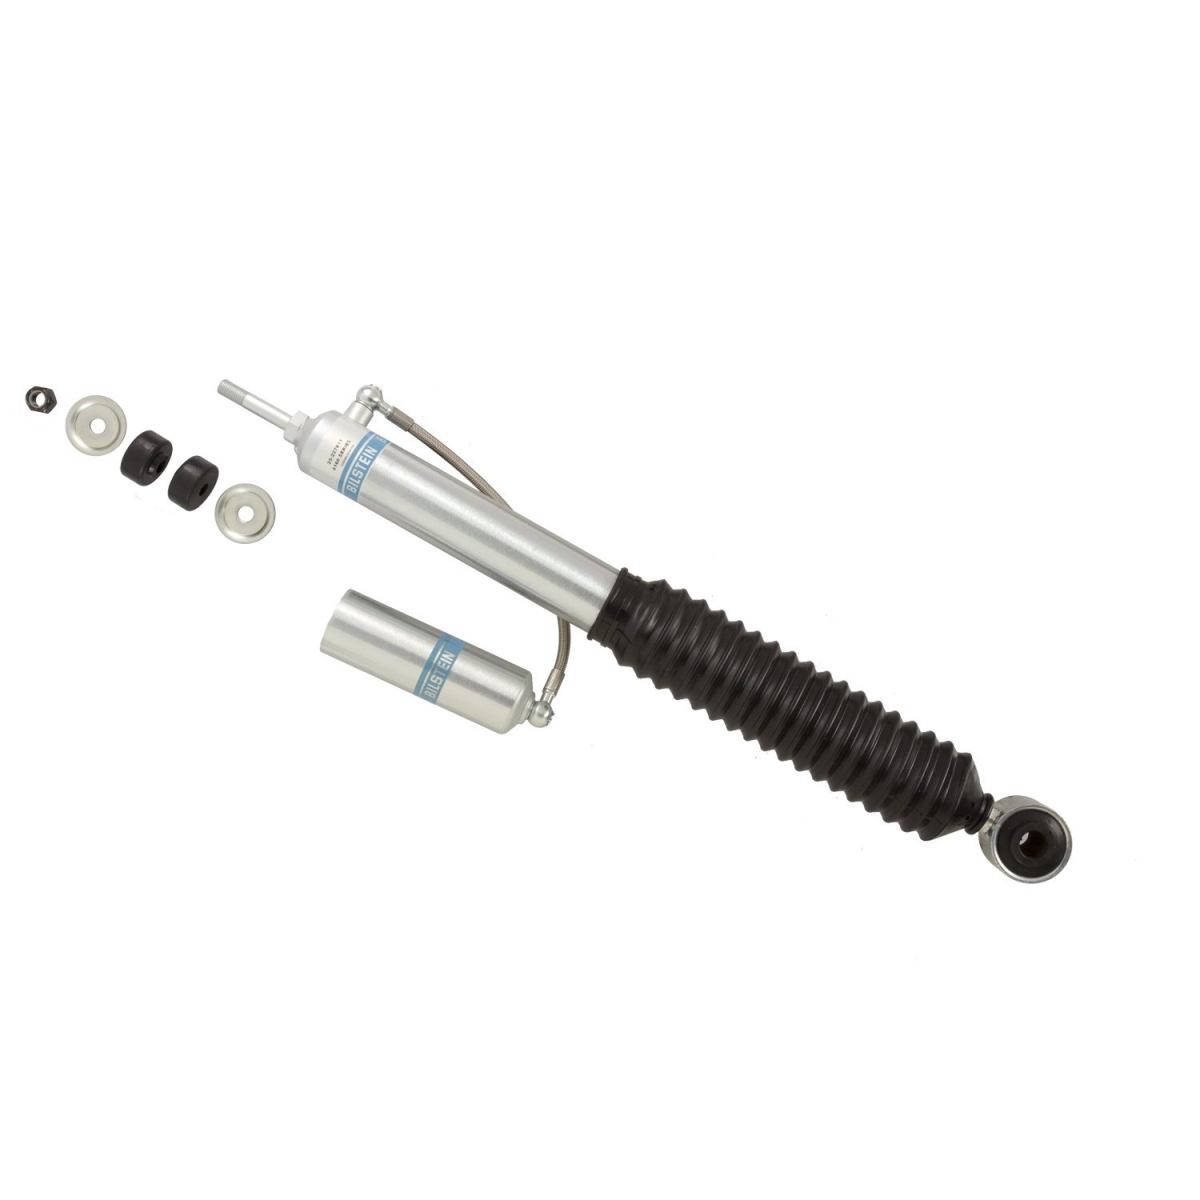 UPC 651860863221 product image for 25313154 Smooth Body Shock Absorber for 2003-2009 Lexus GX | upcitemdb.com